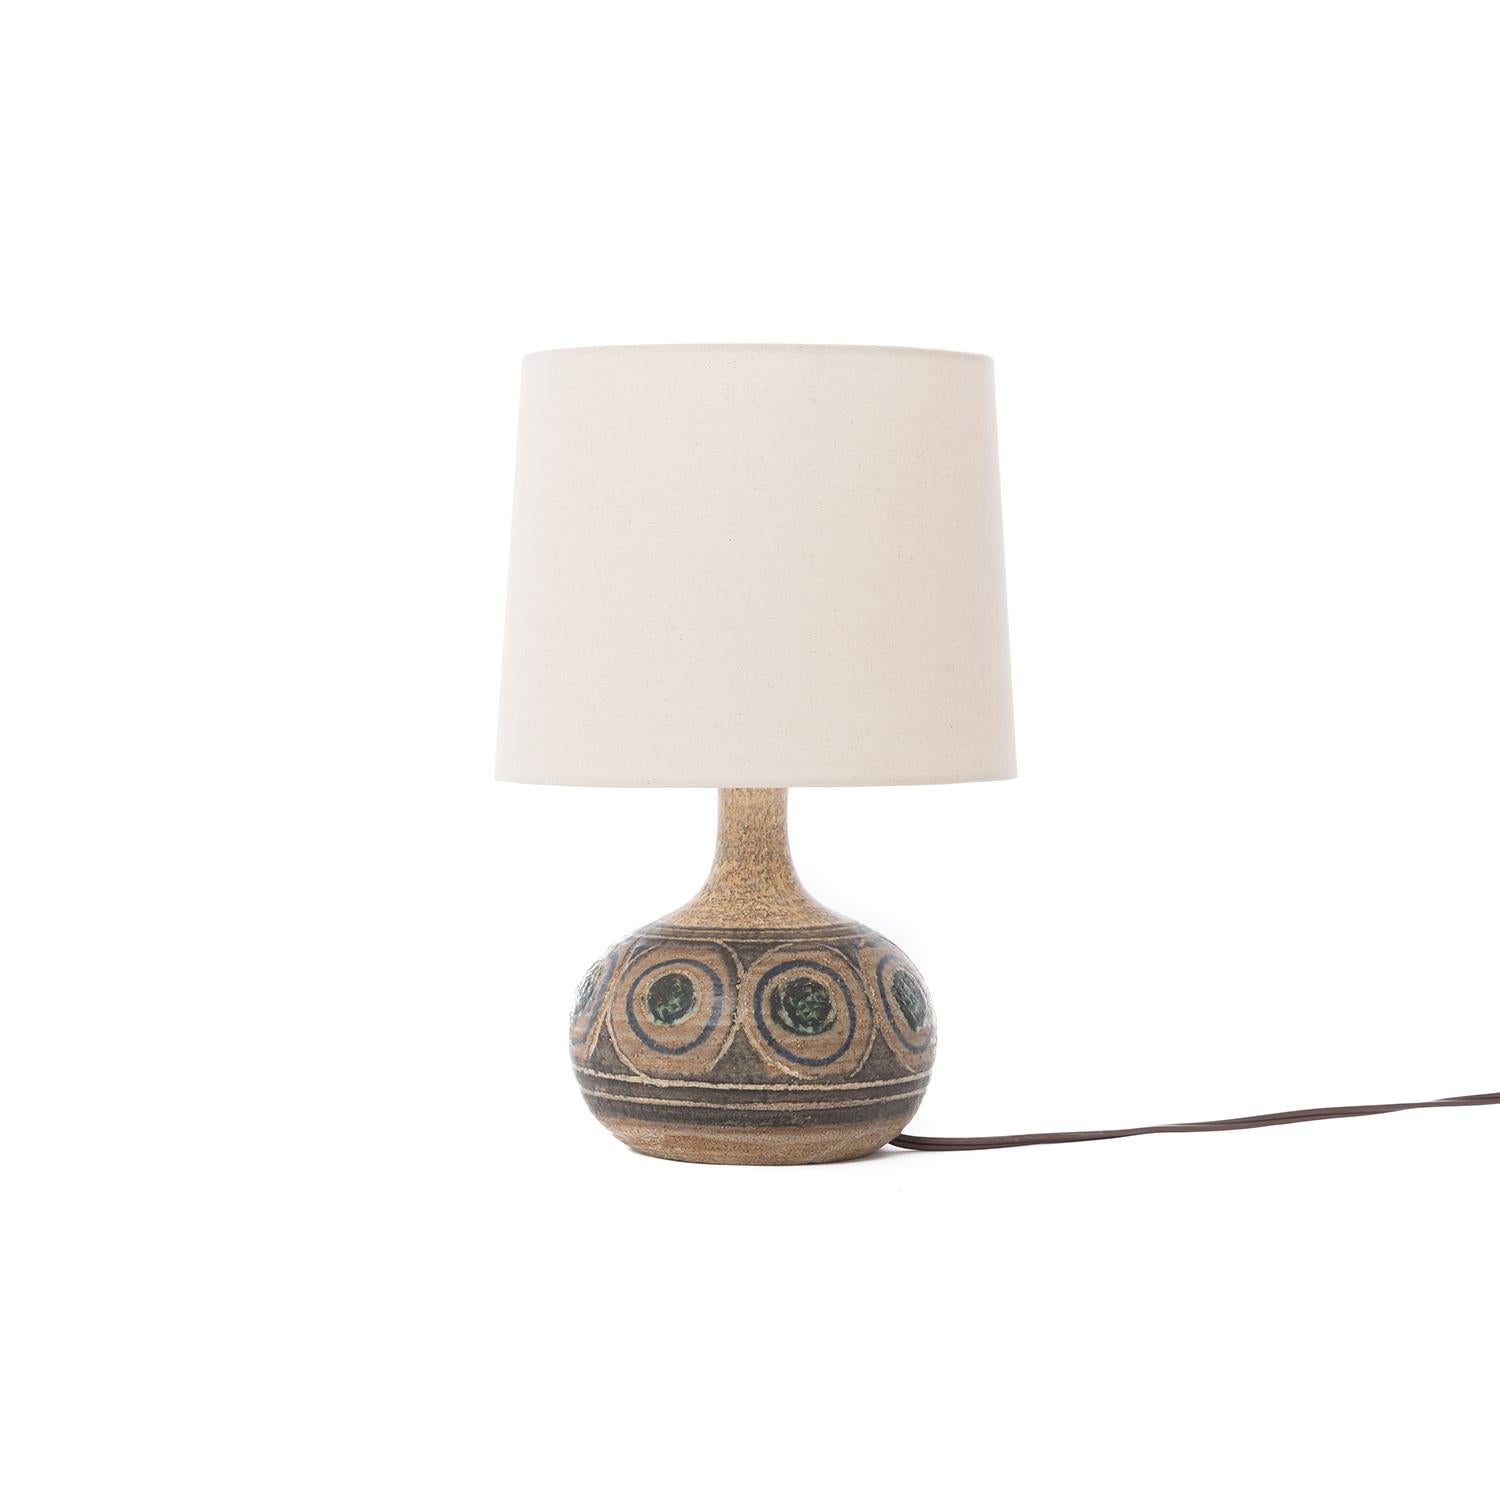 This vintage original Scandinavian Modern glazed stoneware table lamp sports a cheery concentric circle pattern in tan, brown, grey-blue and cream. The base is 8